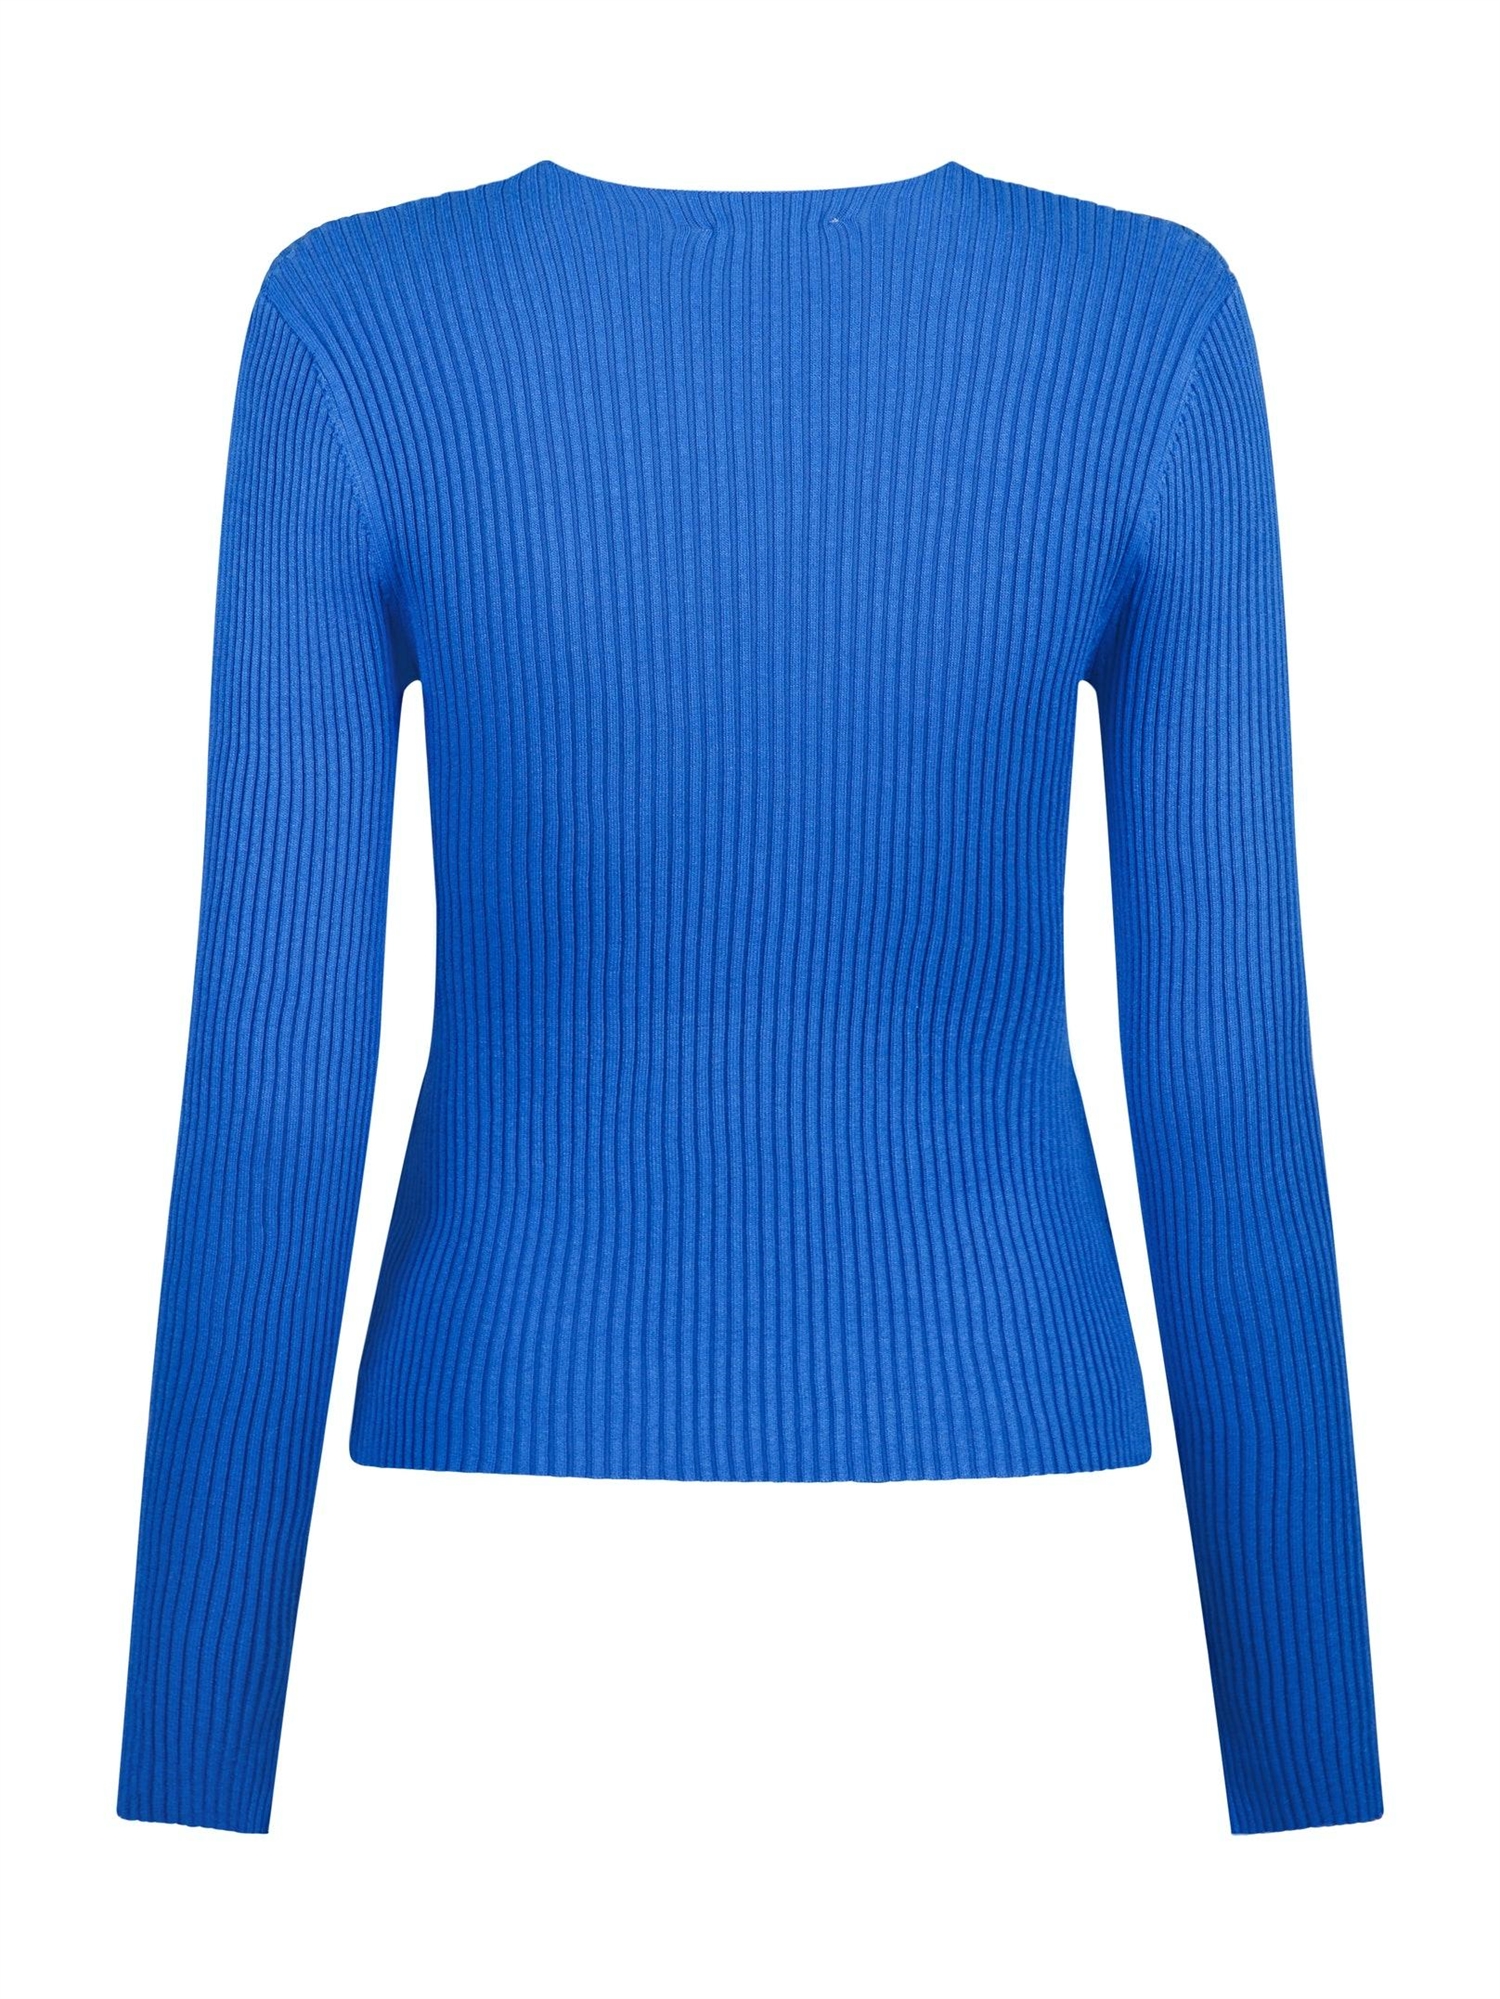 Italy Solid Knit Bluse Blue - Shop Neo Noir Nyheder